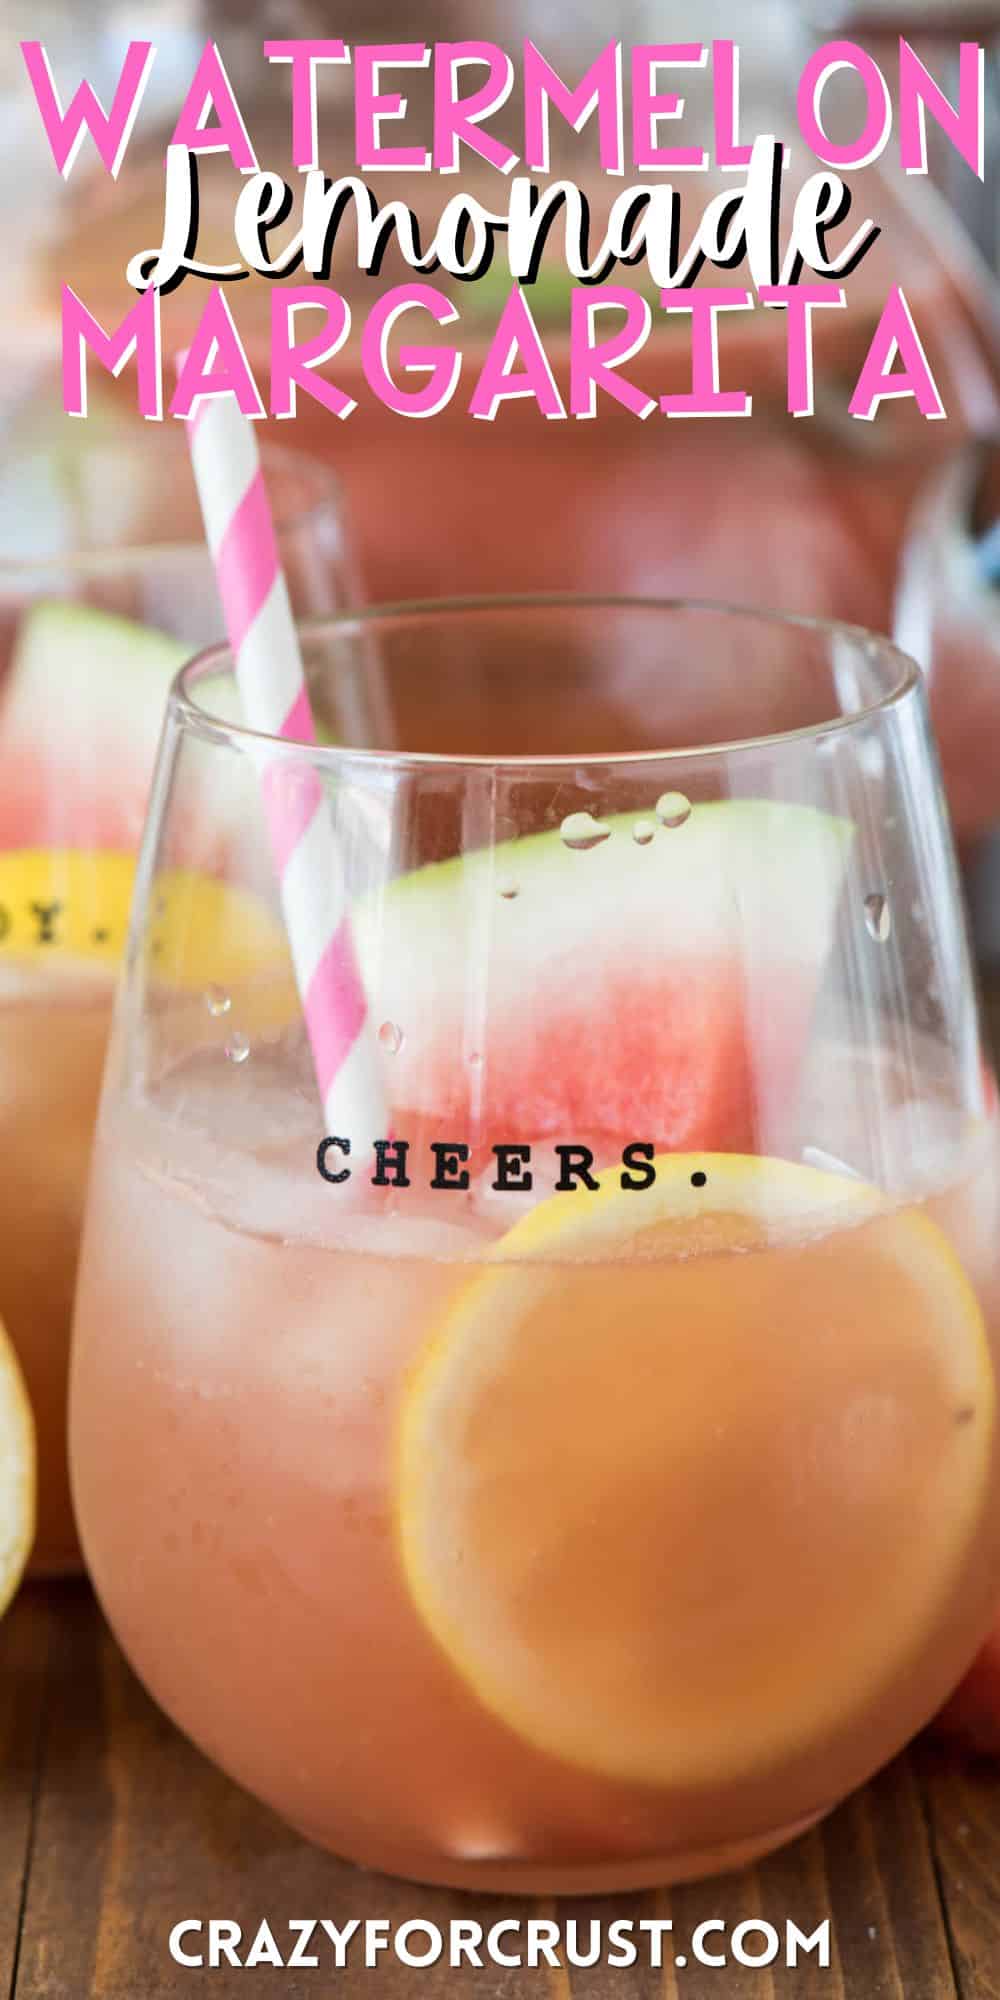 margarita in a short clear glass with sliced watermelons and lemons and a pink and white straw with words on the image.